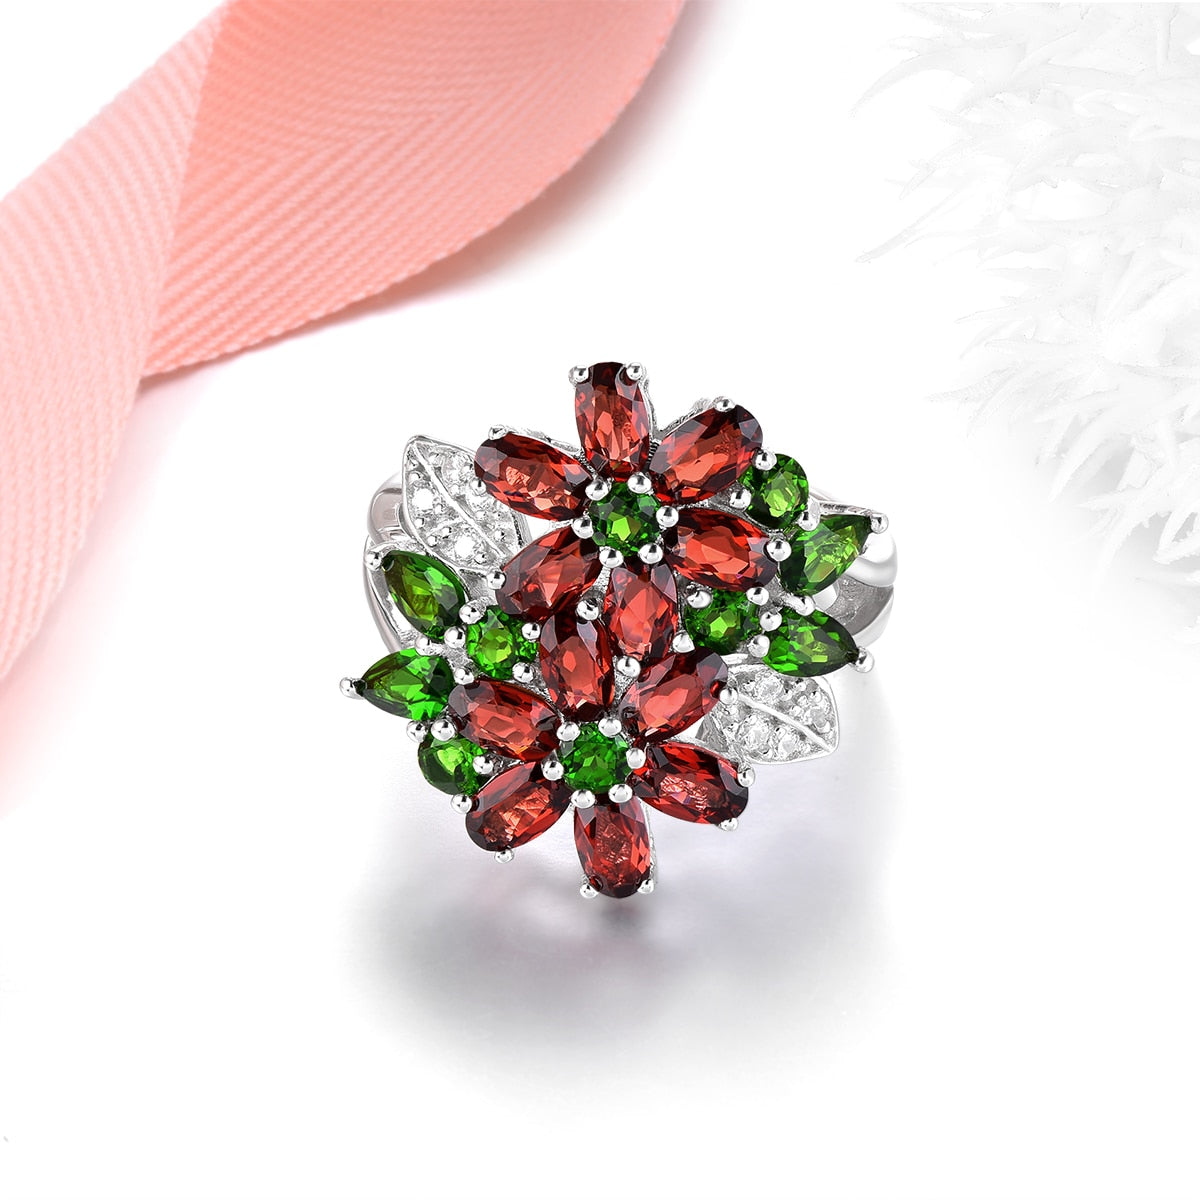 Natural Genuine Garnet Diopside Solid Silver Rings 5 Carats Colorful Gemstone Women Classic Exquisite S925 Anniversary Jewelry